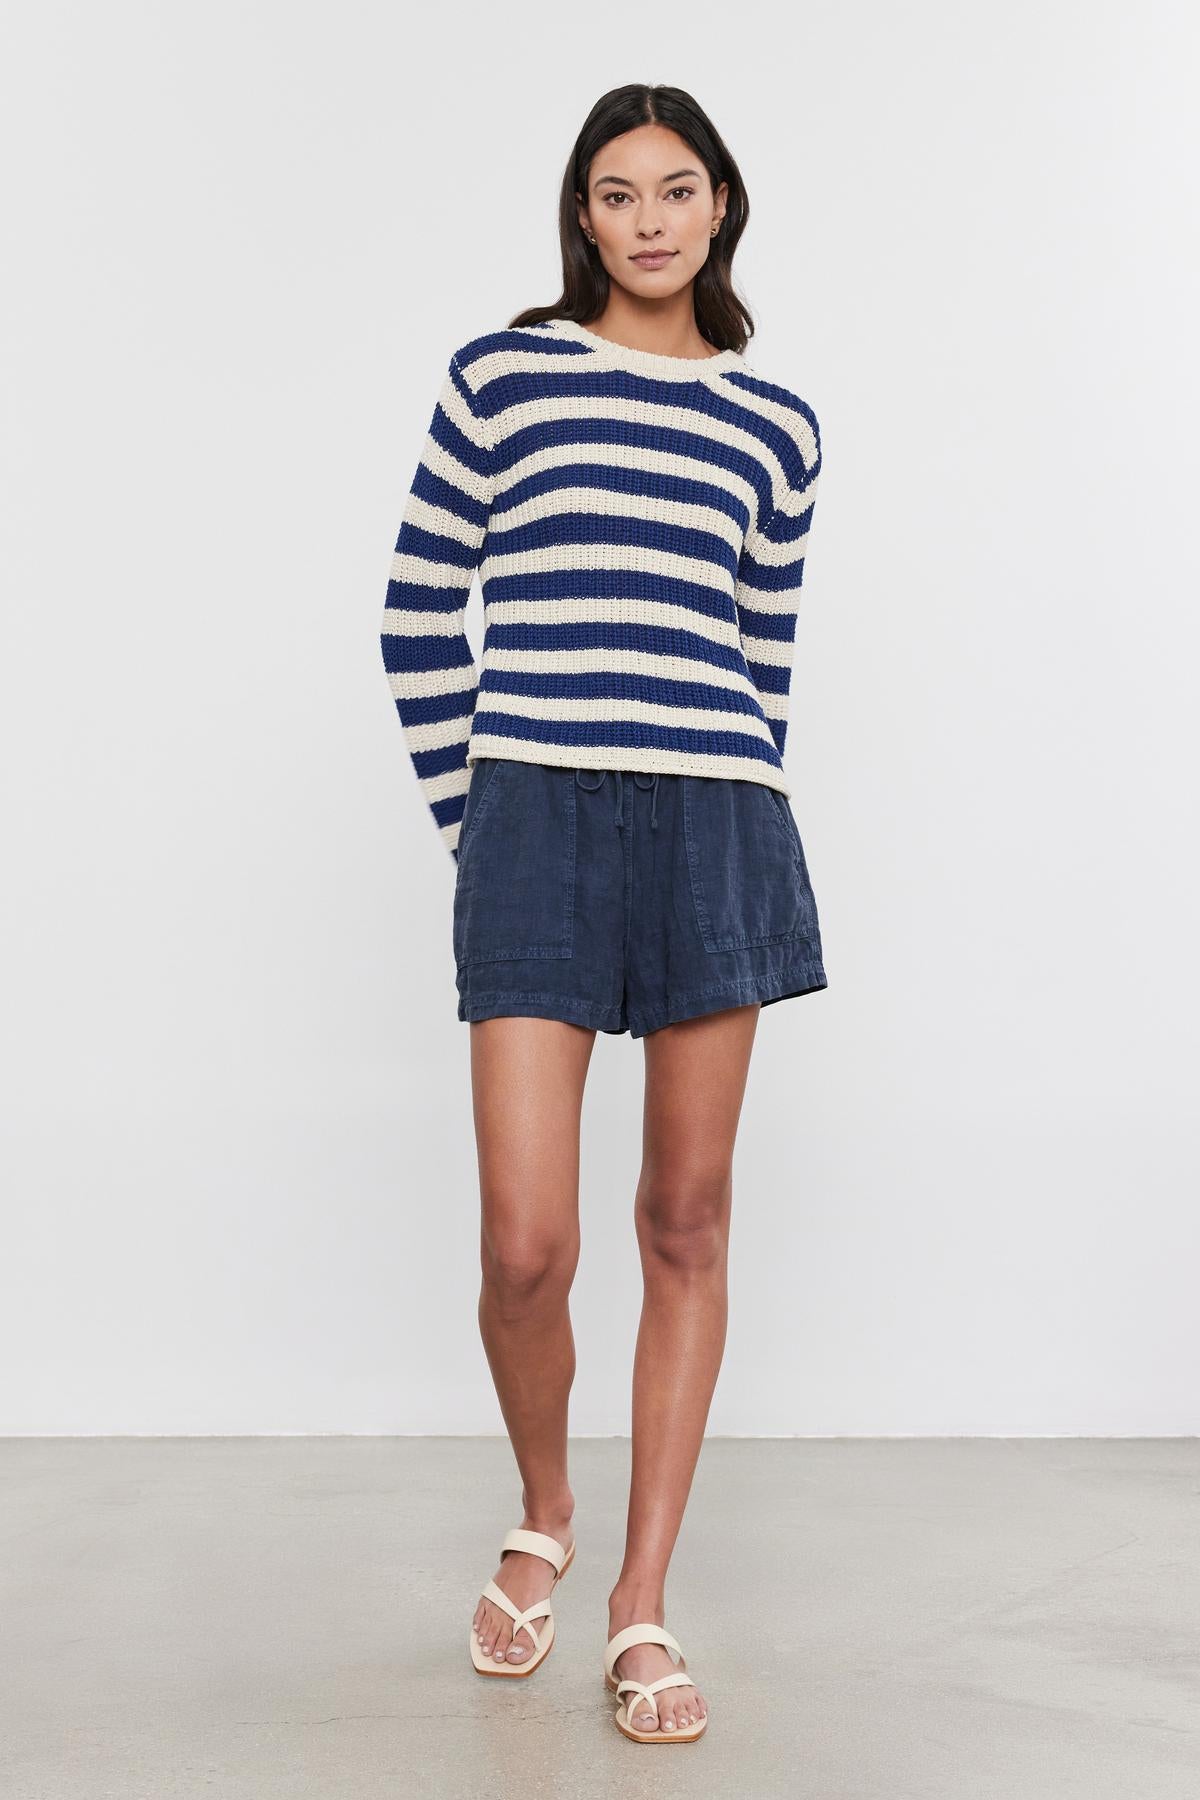 A woman wearing a blue and white crew neckline Velvet by Graham & Spencer MAXINE SWEATER with blue denim shorts and white sandals stands against a plain backdrop.-36830358044865